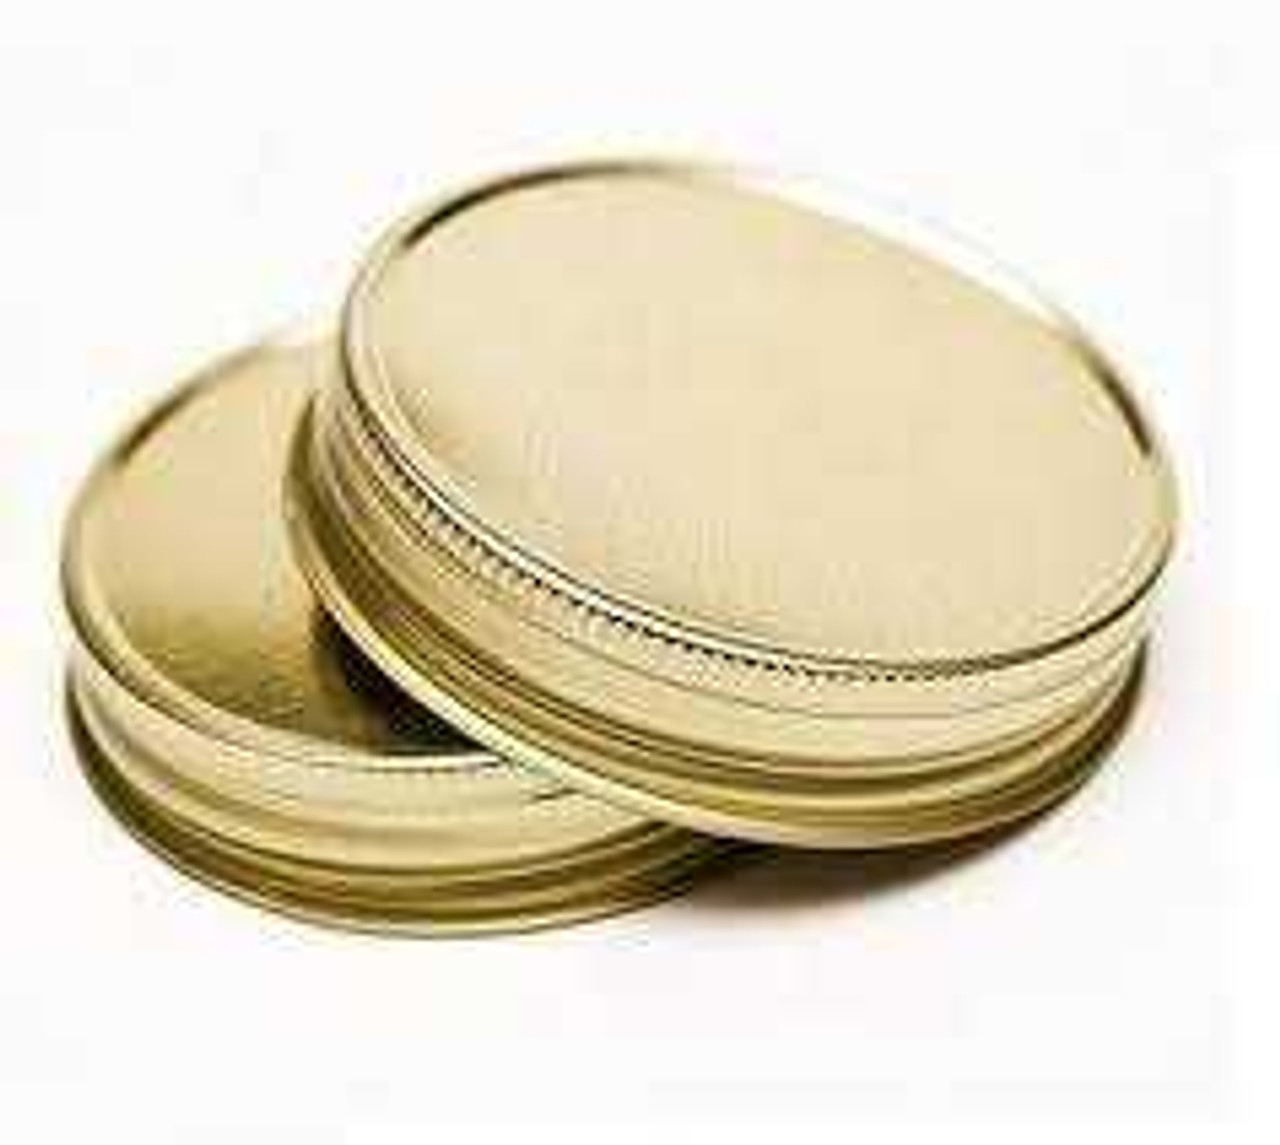 https://cdn11.bigcommerce.com/s-1ybtx/images/stencil/1280x1280/products/1391/6787/63400-Gold-Jar-Lid-with-Plastisol-Liner_4374__91470.1699989152.jpg?c=2